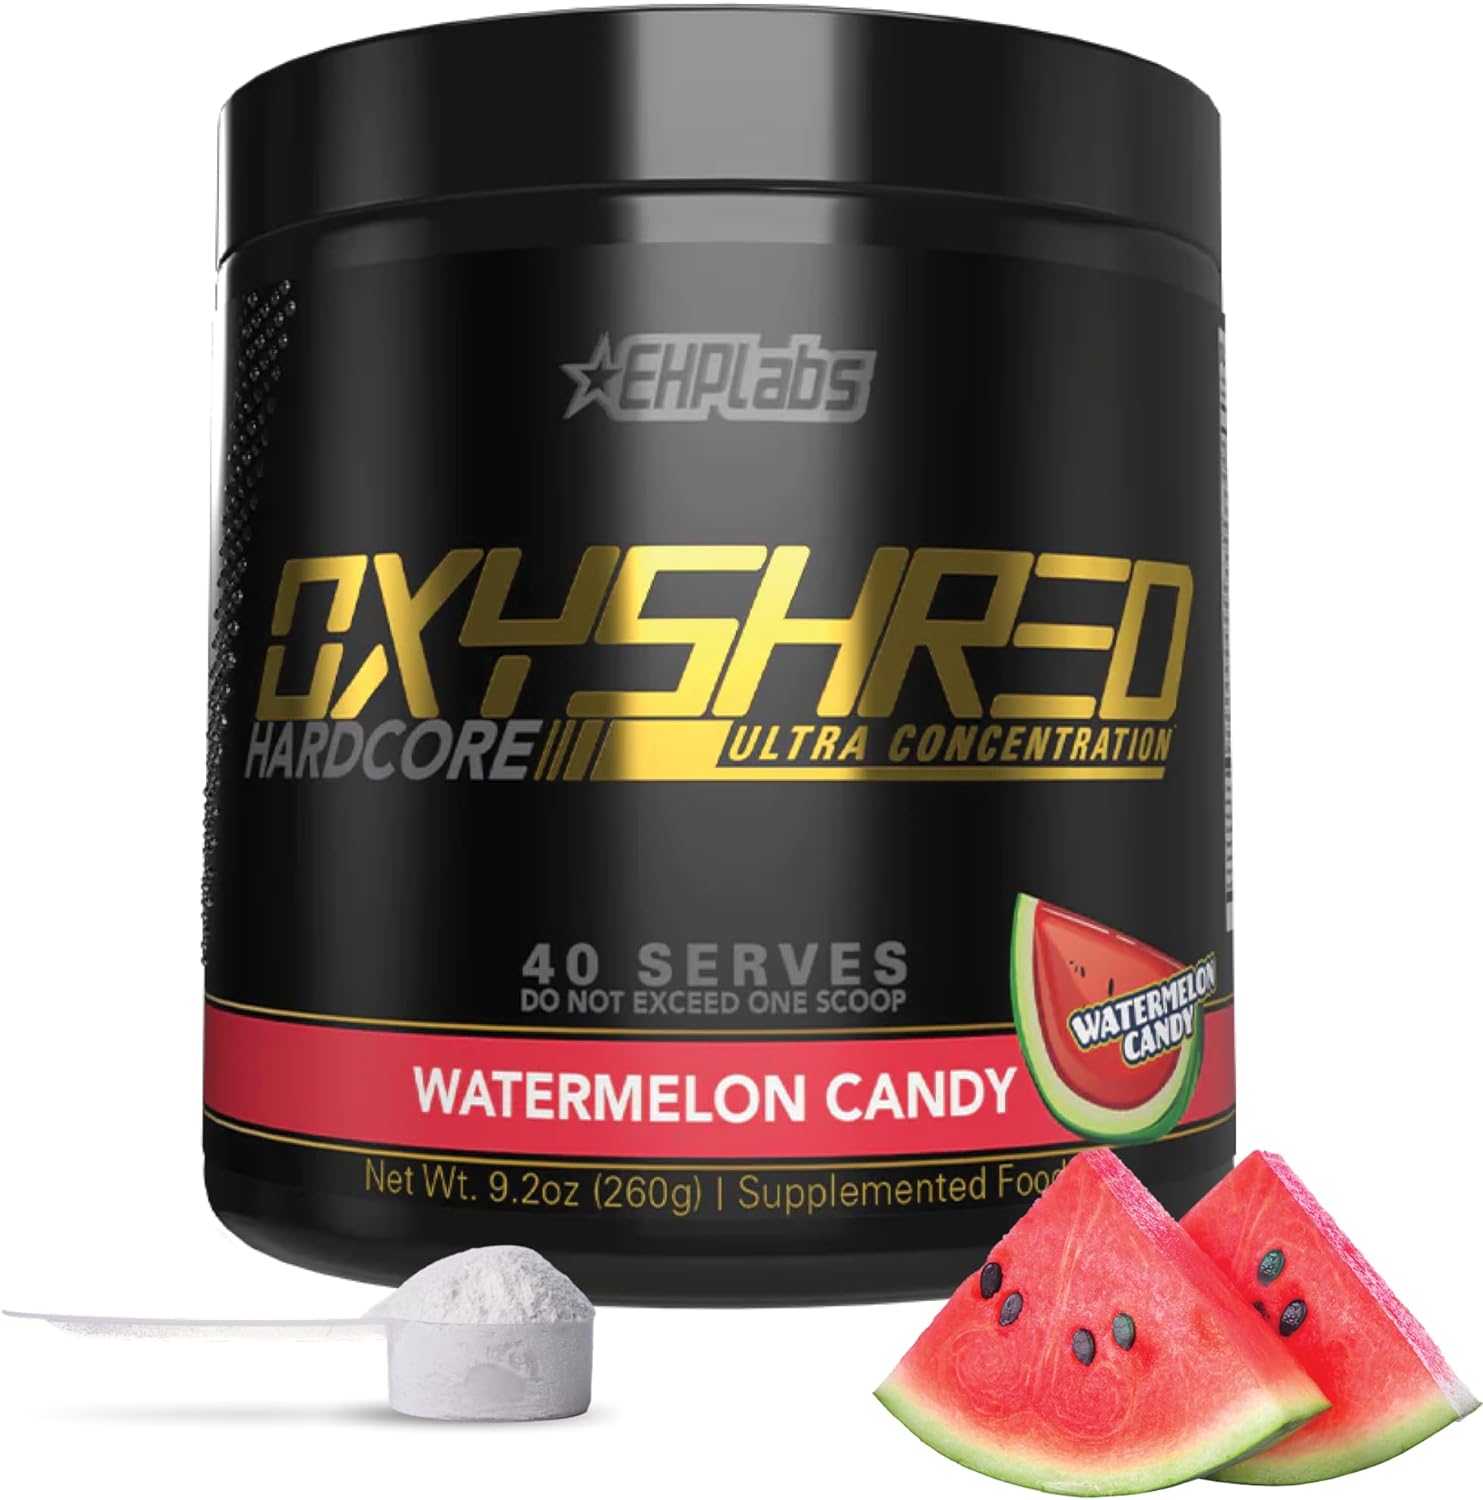 EHPlabs OxyShred Hardcore Pre Workout Powder for Shredding - Preworkout Powder with L Glutamine & Acetyl L Carnitine, Energy Boost Drink - 275mg of Caffeine - Watermelon Candy, 40 Servings